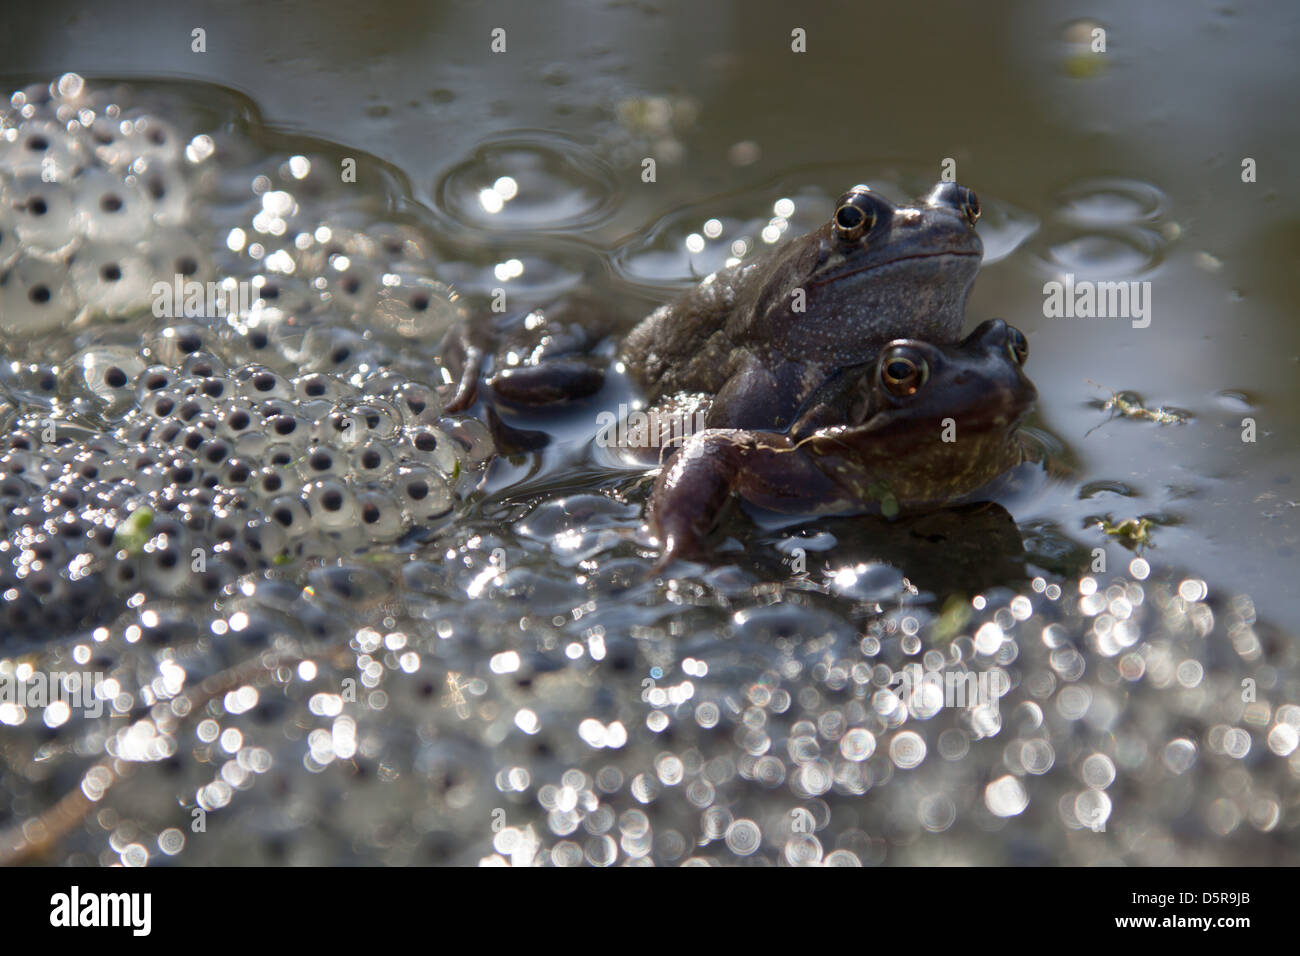 Frogs mating in a garden pond in the Cheshire village of Farndon, with frog spawn in the foreground. Stock Photo